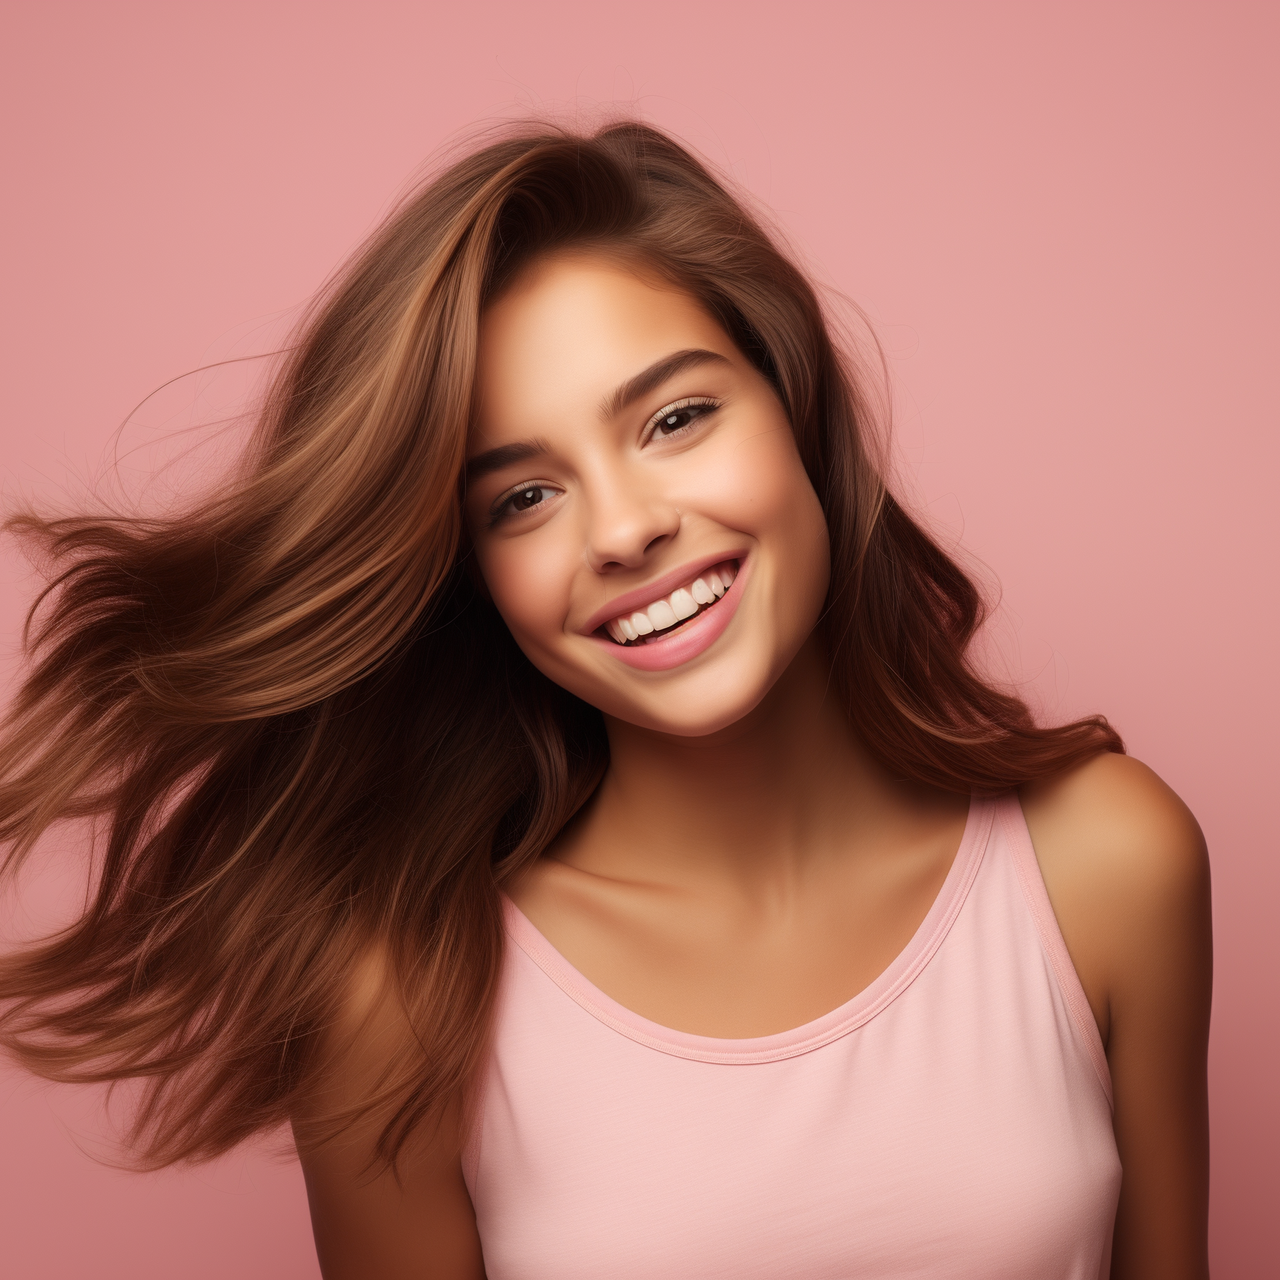 A teenage girl with a brown hair and pink shirt on, she is smiling in front of a pink background